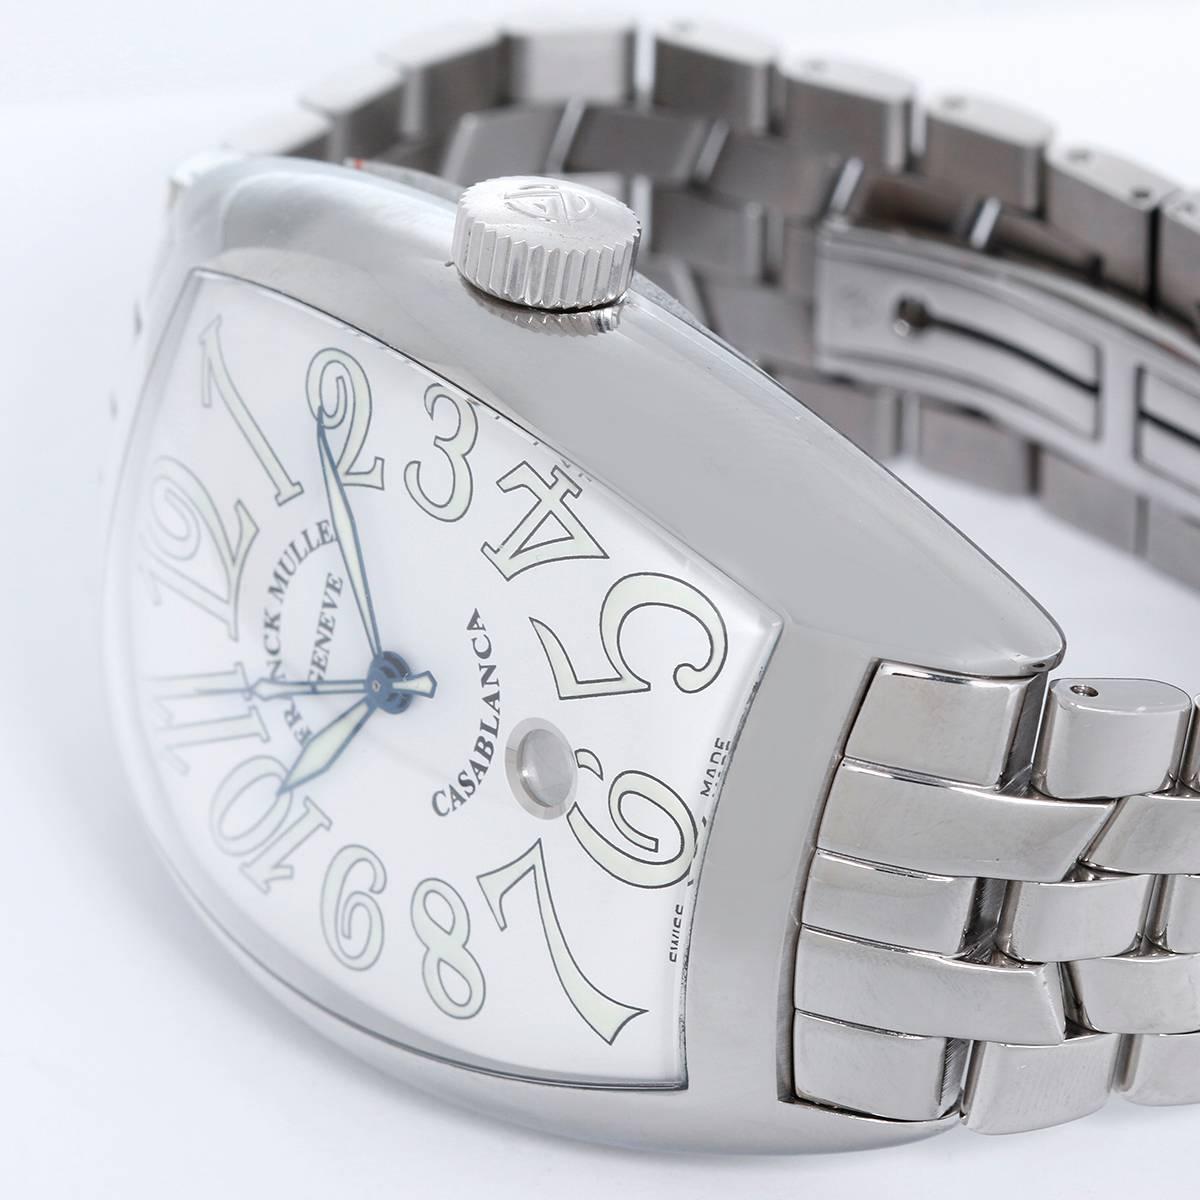 Franck Muller Casablanca Stainless Steel Men's Watch  9880 C DT -  Automatic winding. Stainless Steel case (60mm x 40mm) (40mm). White dial with lumious Arabic numerals. Stainless steel Franck Muller bracelet. Pre-owned with box and papers.